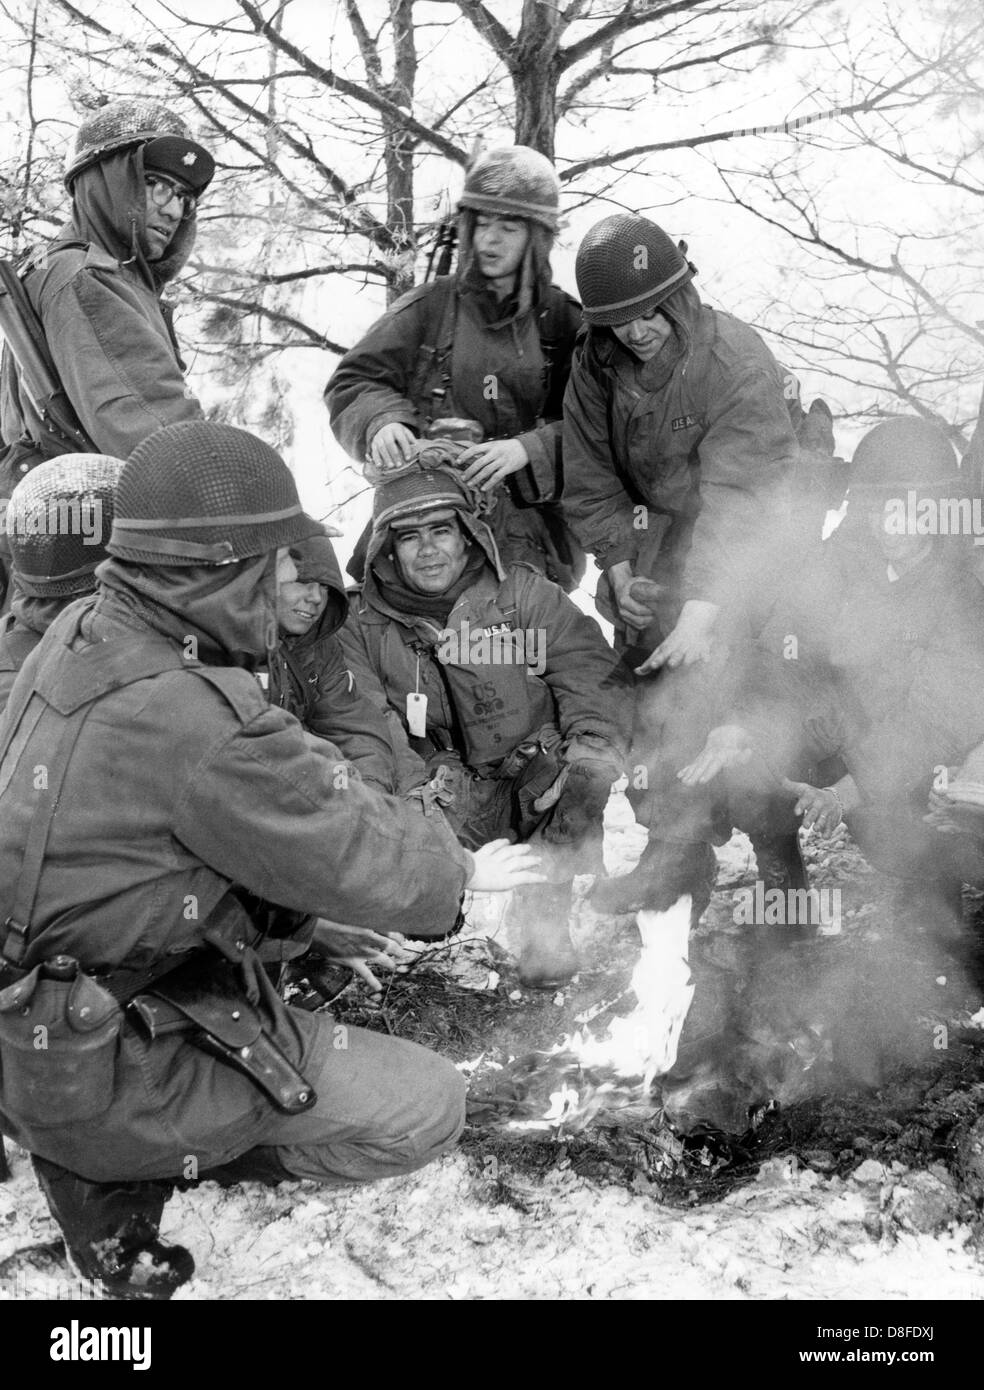 Soldiers of the US army warm themselves up at the fire during a routine winter exercise in Grunewald in Berlin on the 23rd of January in 1963. Stock Photo